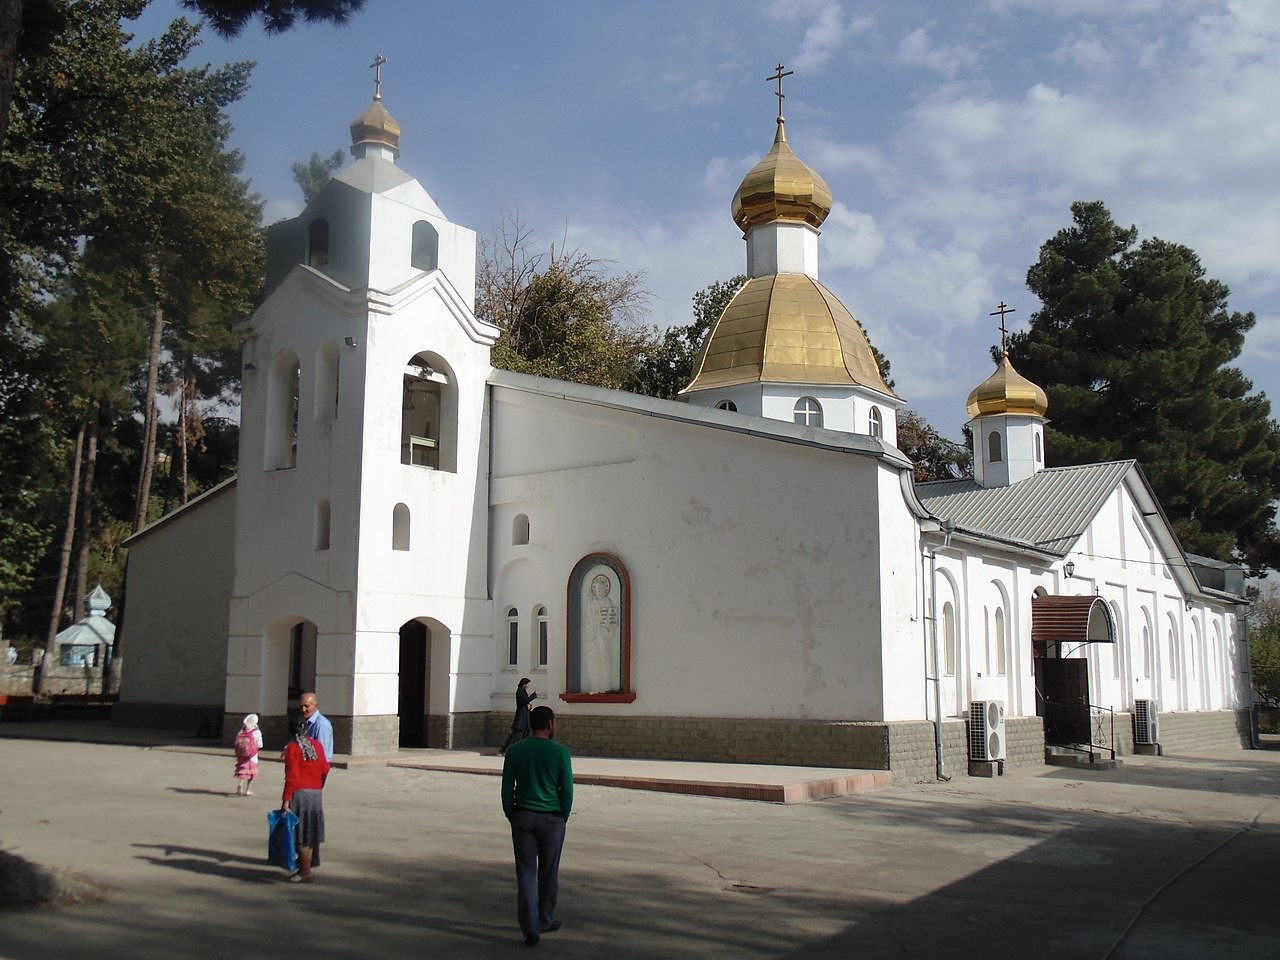 St. Nicholas Cathedral in Dushanbe, present-day Tajikistan, built in 1943